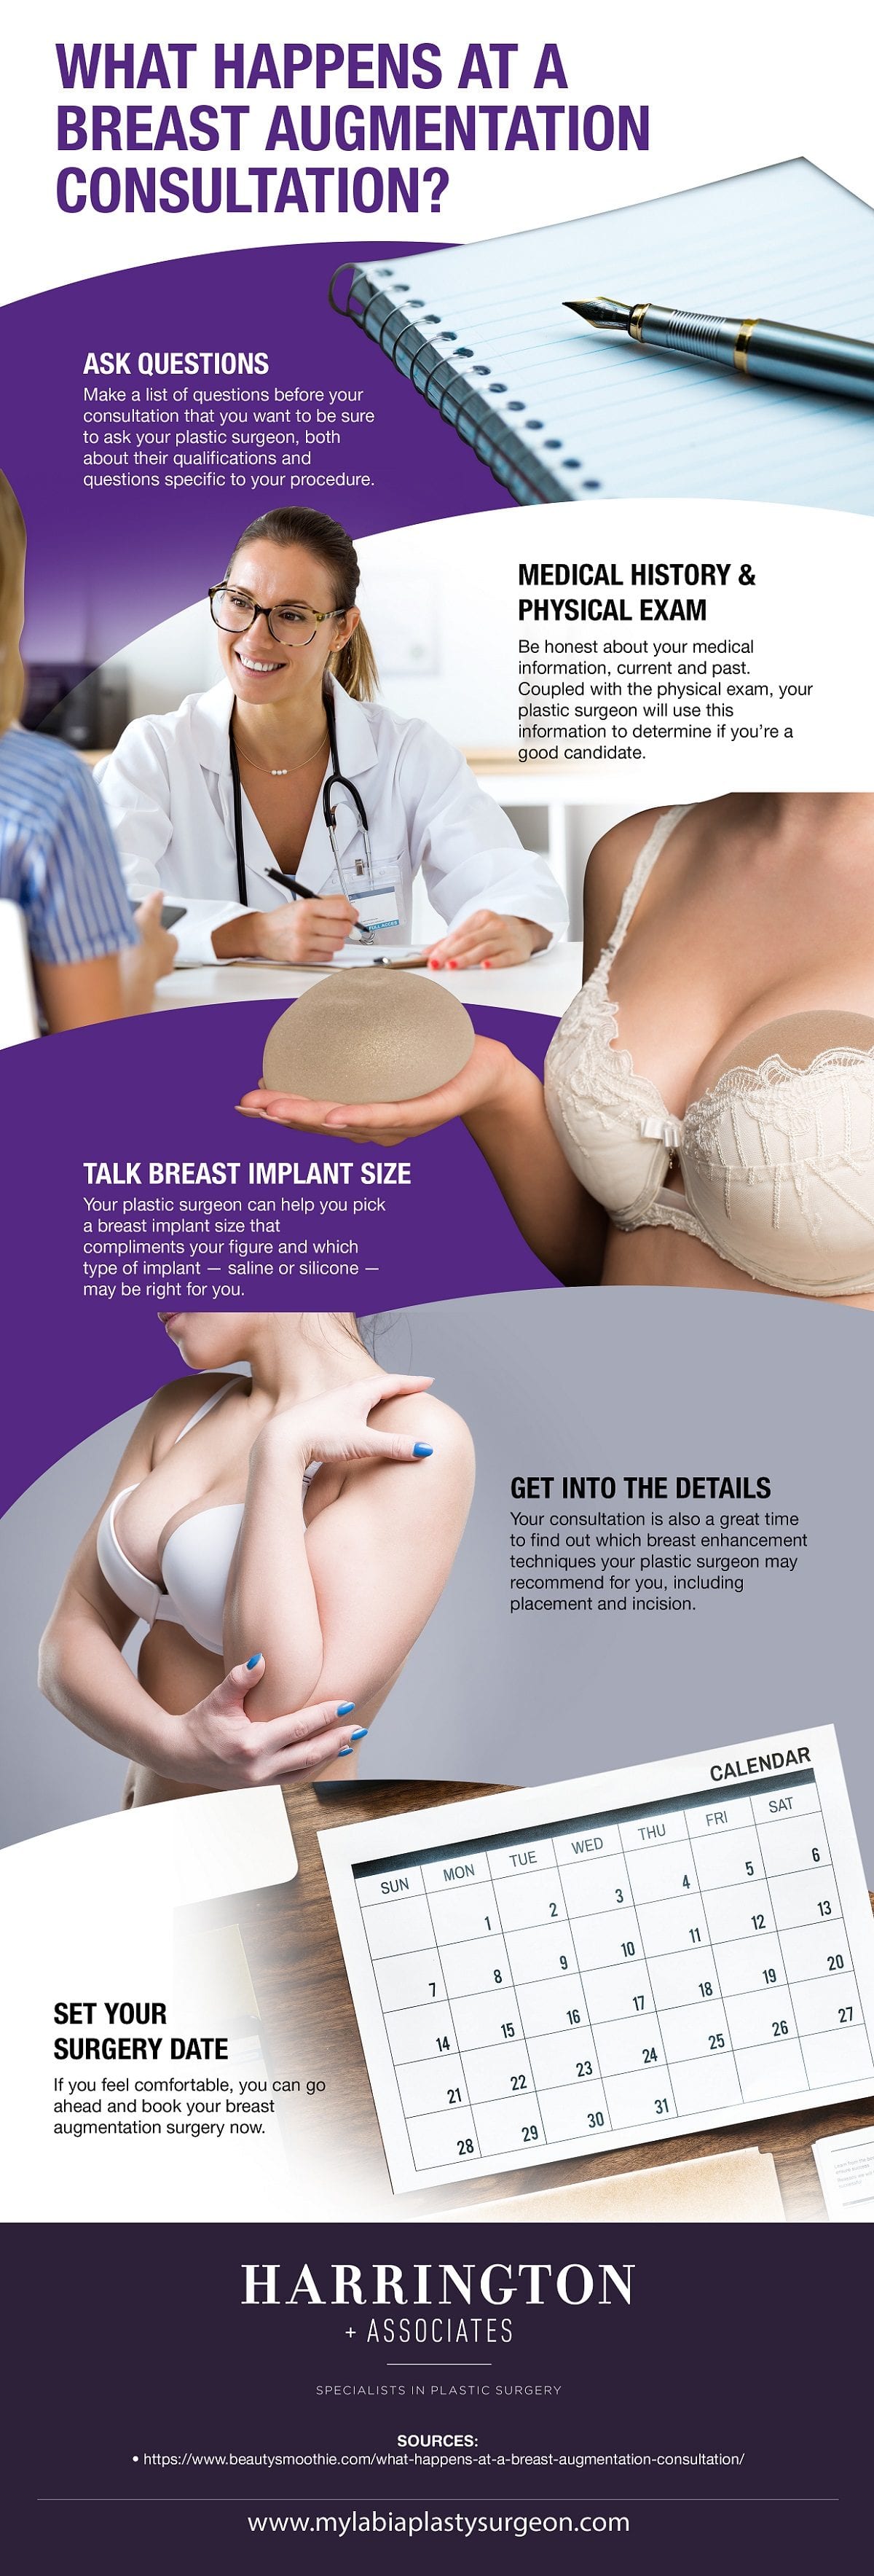 What Happens at a Breast Augmentation Consultation [Infographic]